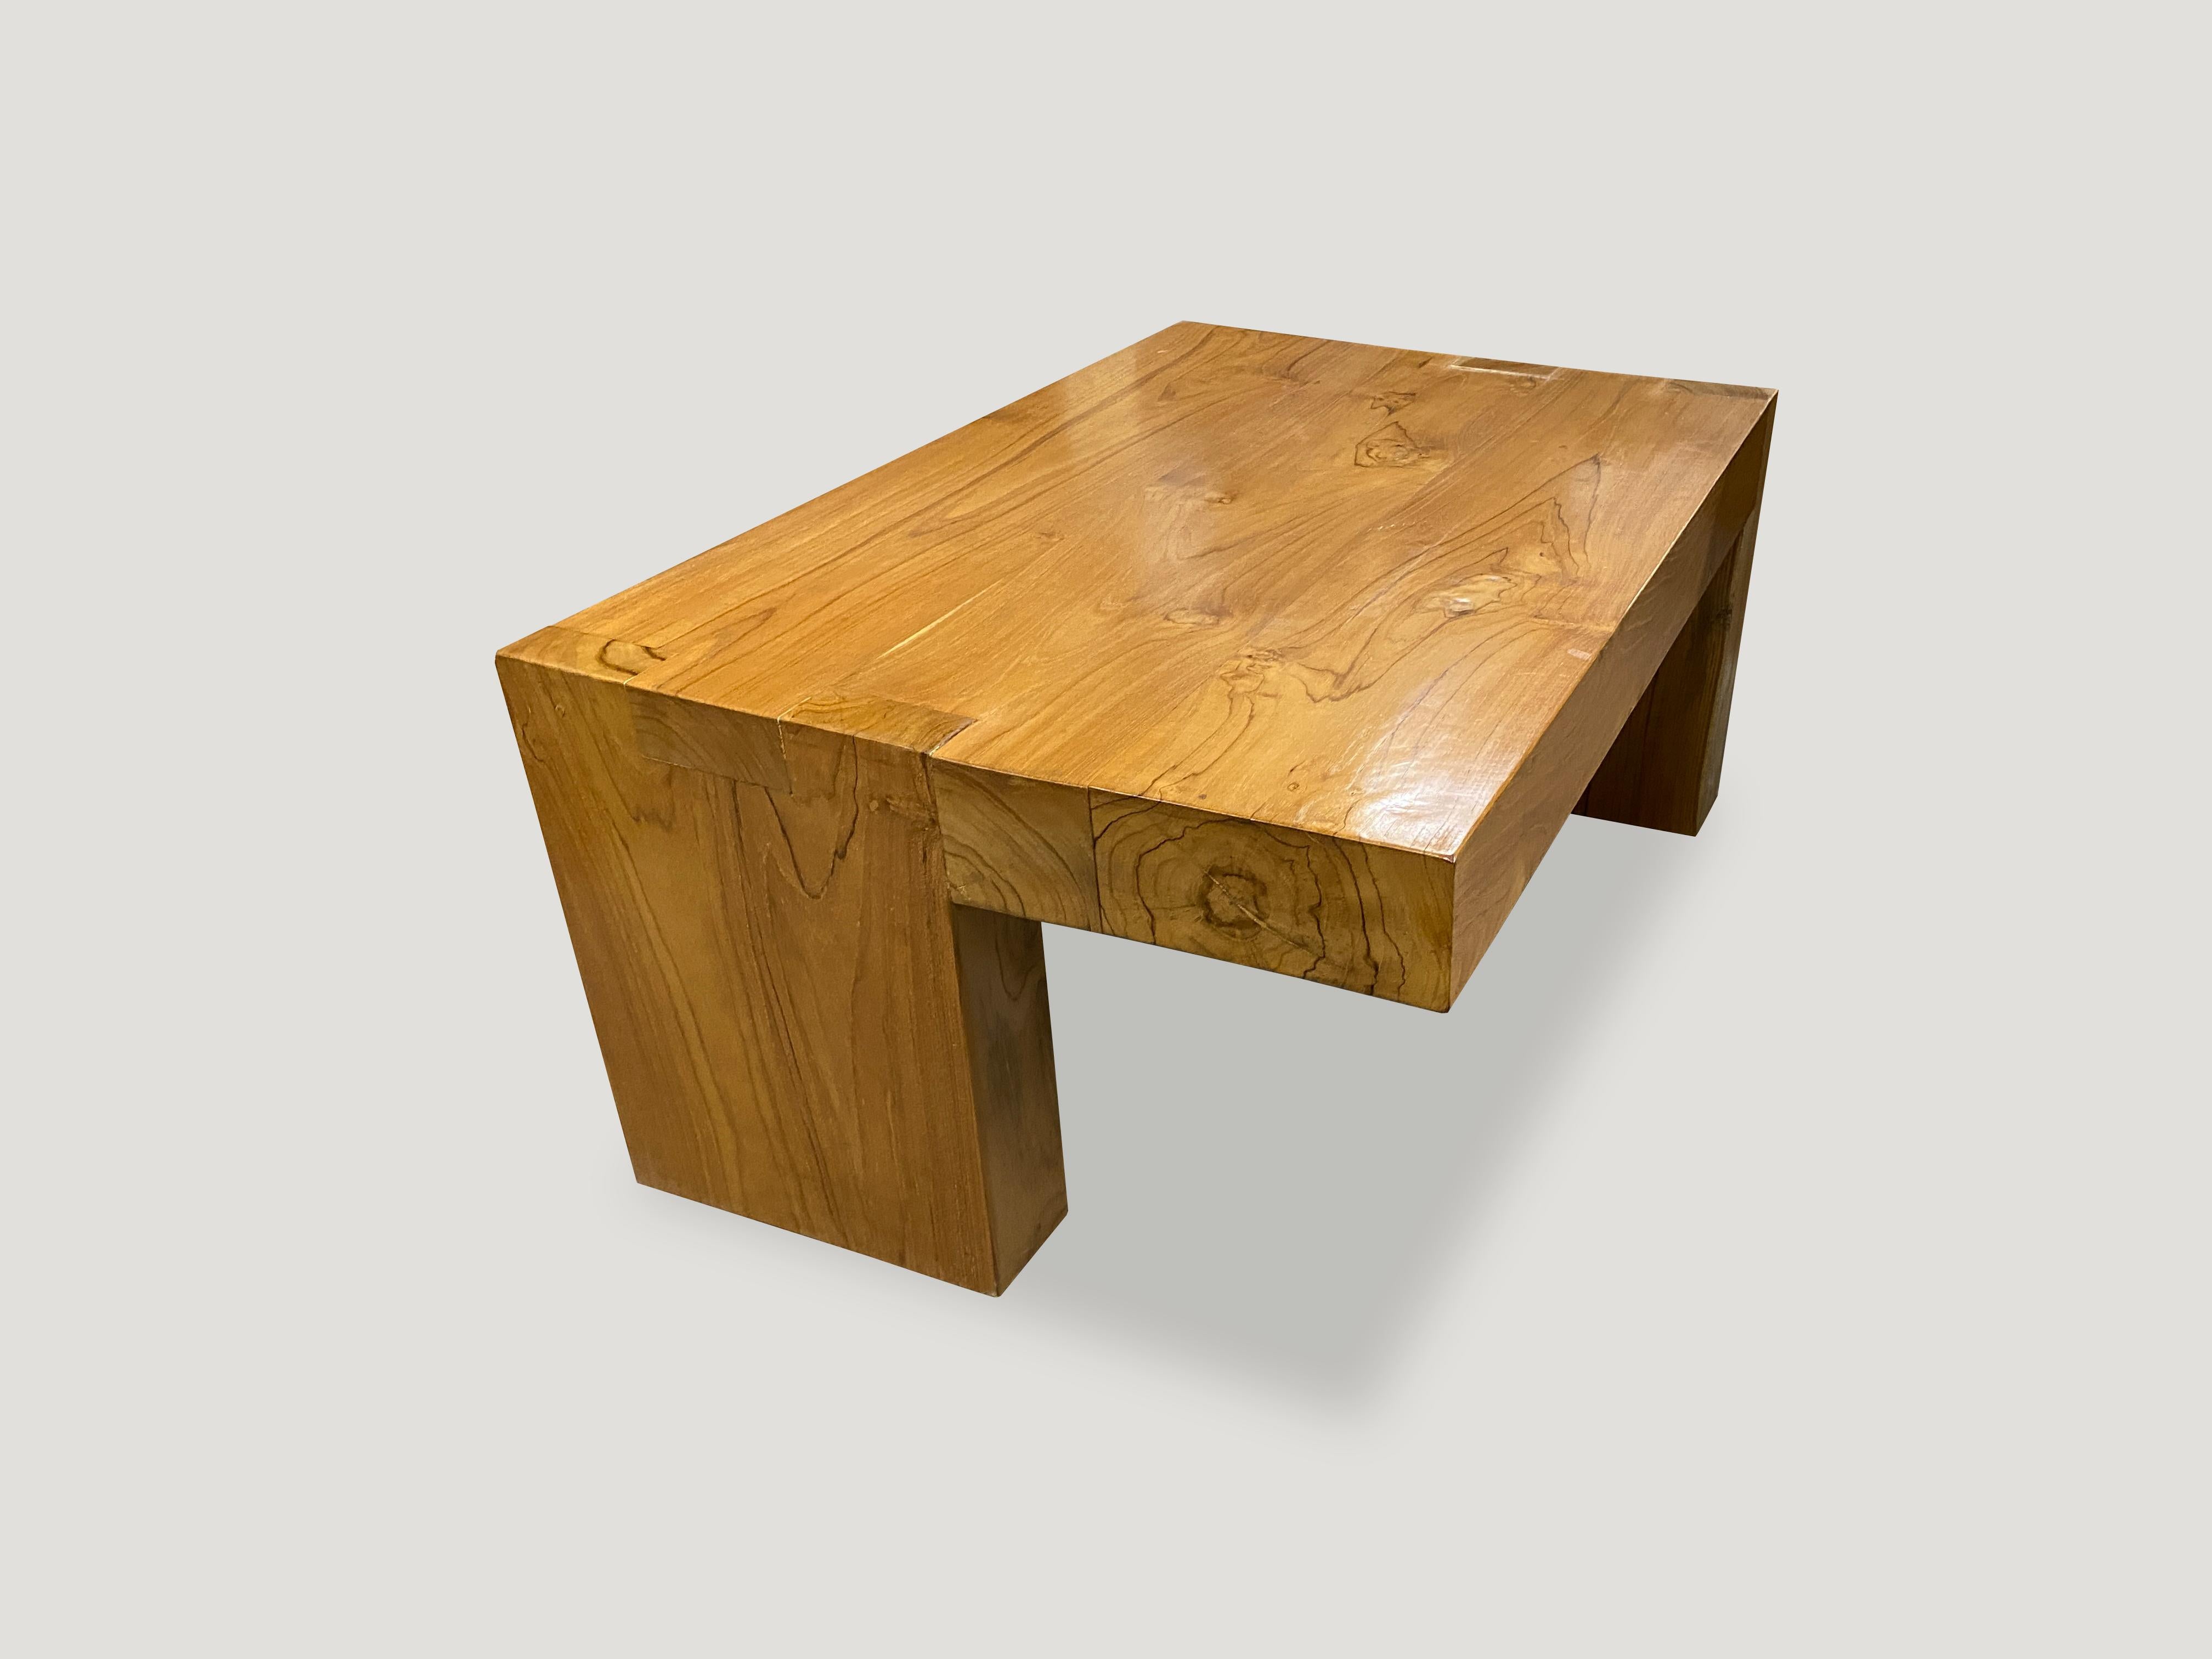 The teak balance coffee table is made from reclaimed teak wood with a four inch top section. Designed with a perfect balance over opposing legs which allows for the piece to float. Custom stains and sizes available. The price reflects the size